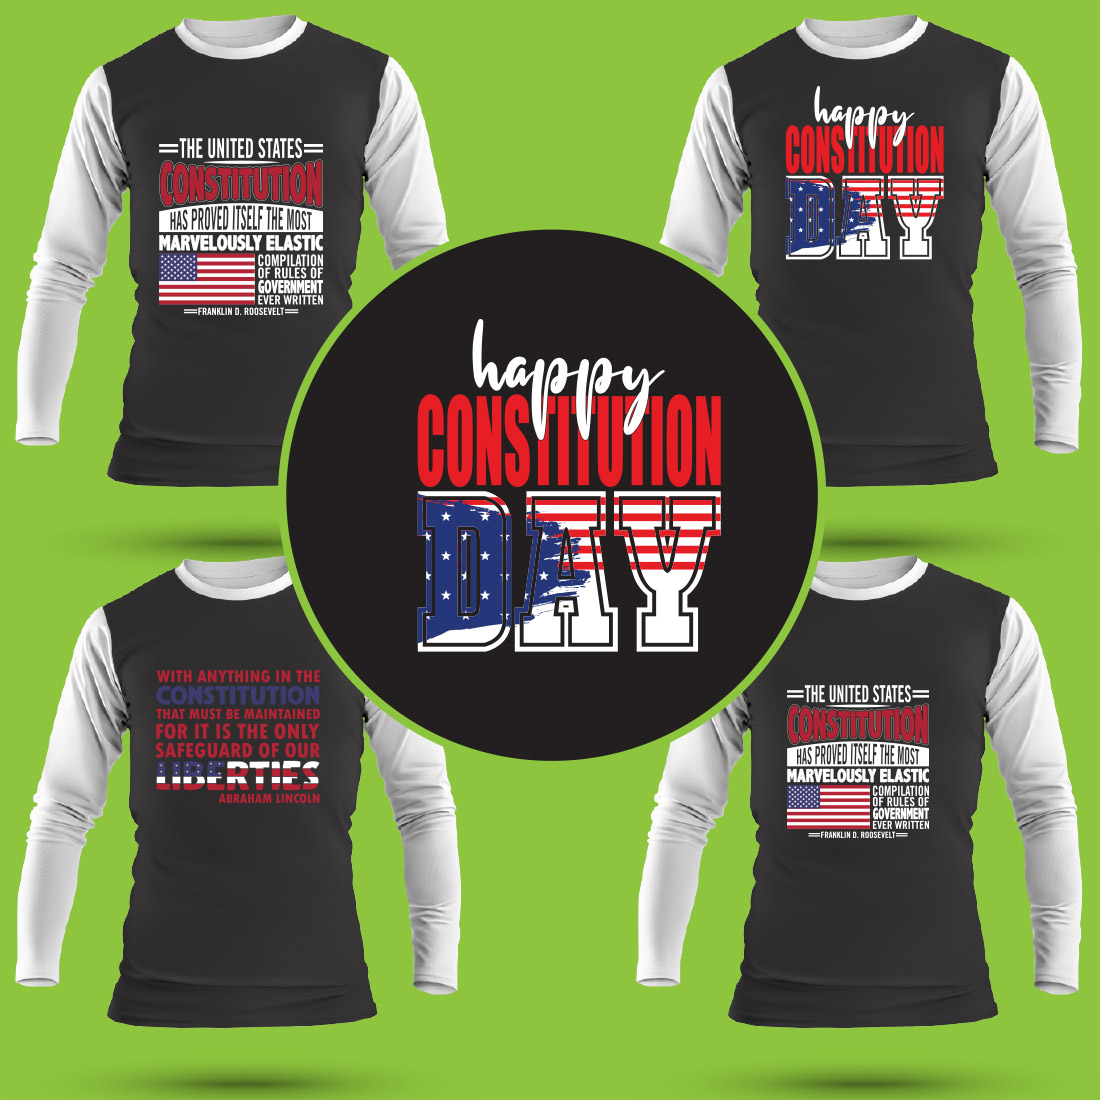 constitution day SVG T Shirt Designs Bundle cover image.